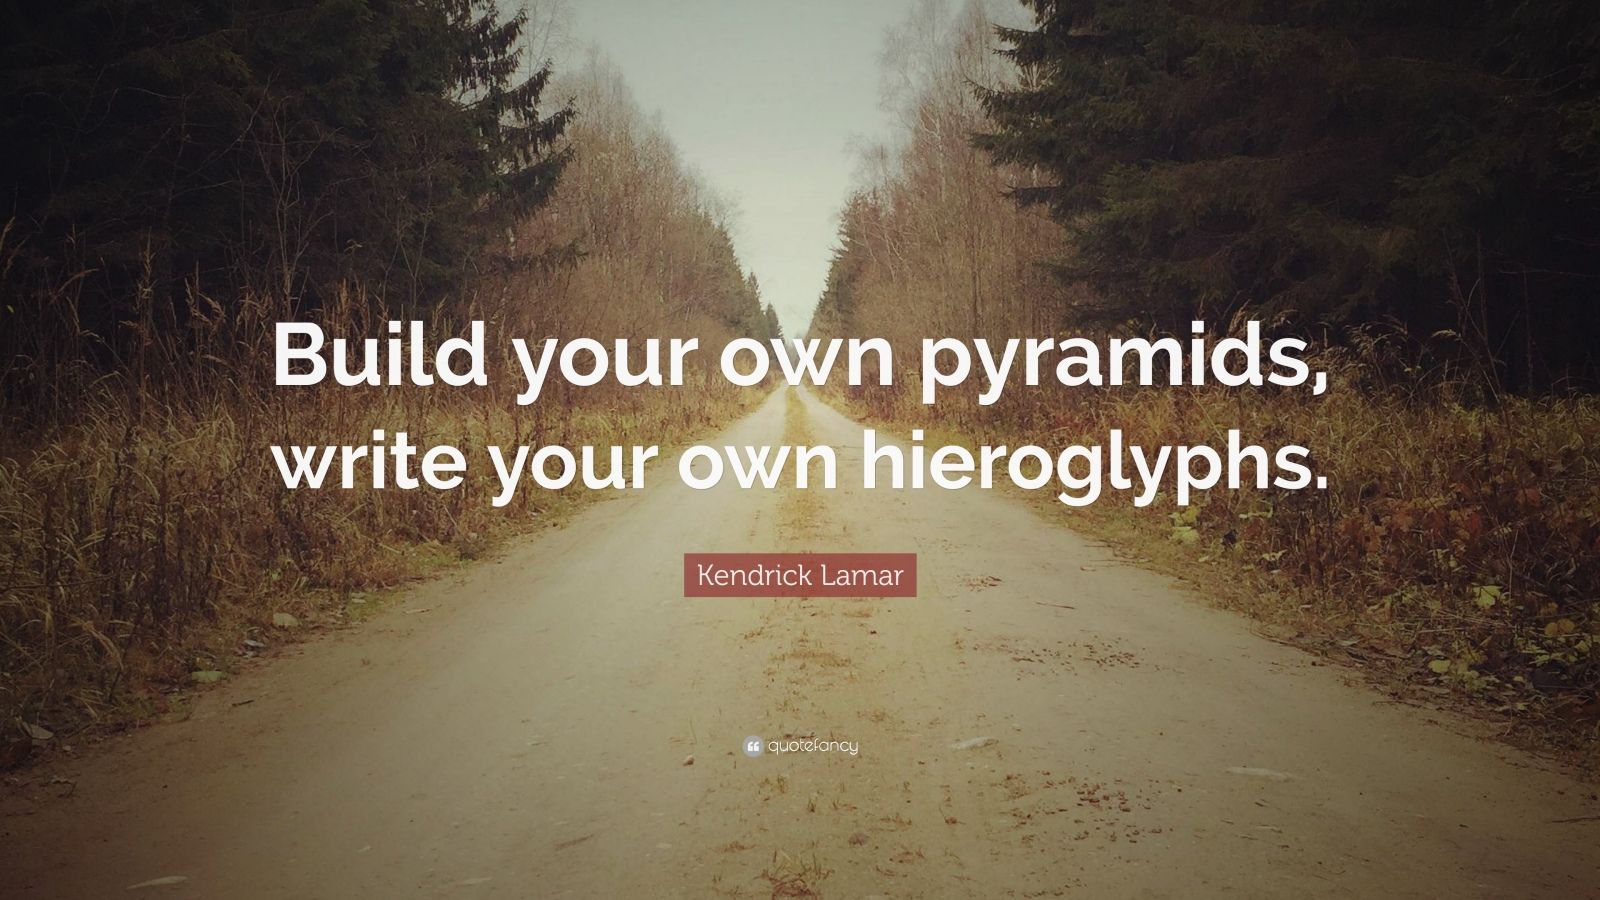 Kendrick Lamar Quote: “Build your own pyramids, write your own